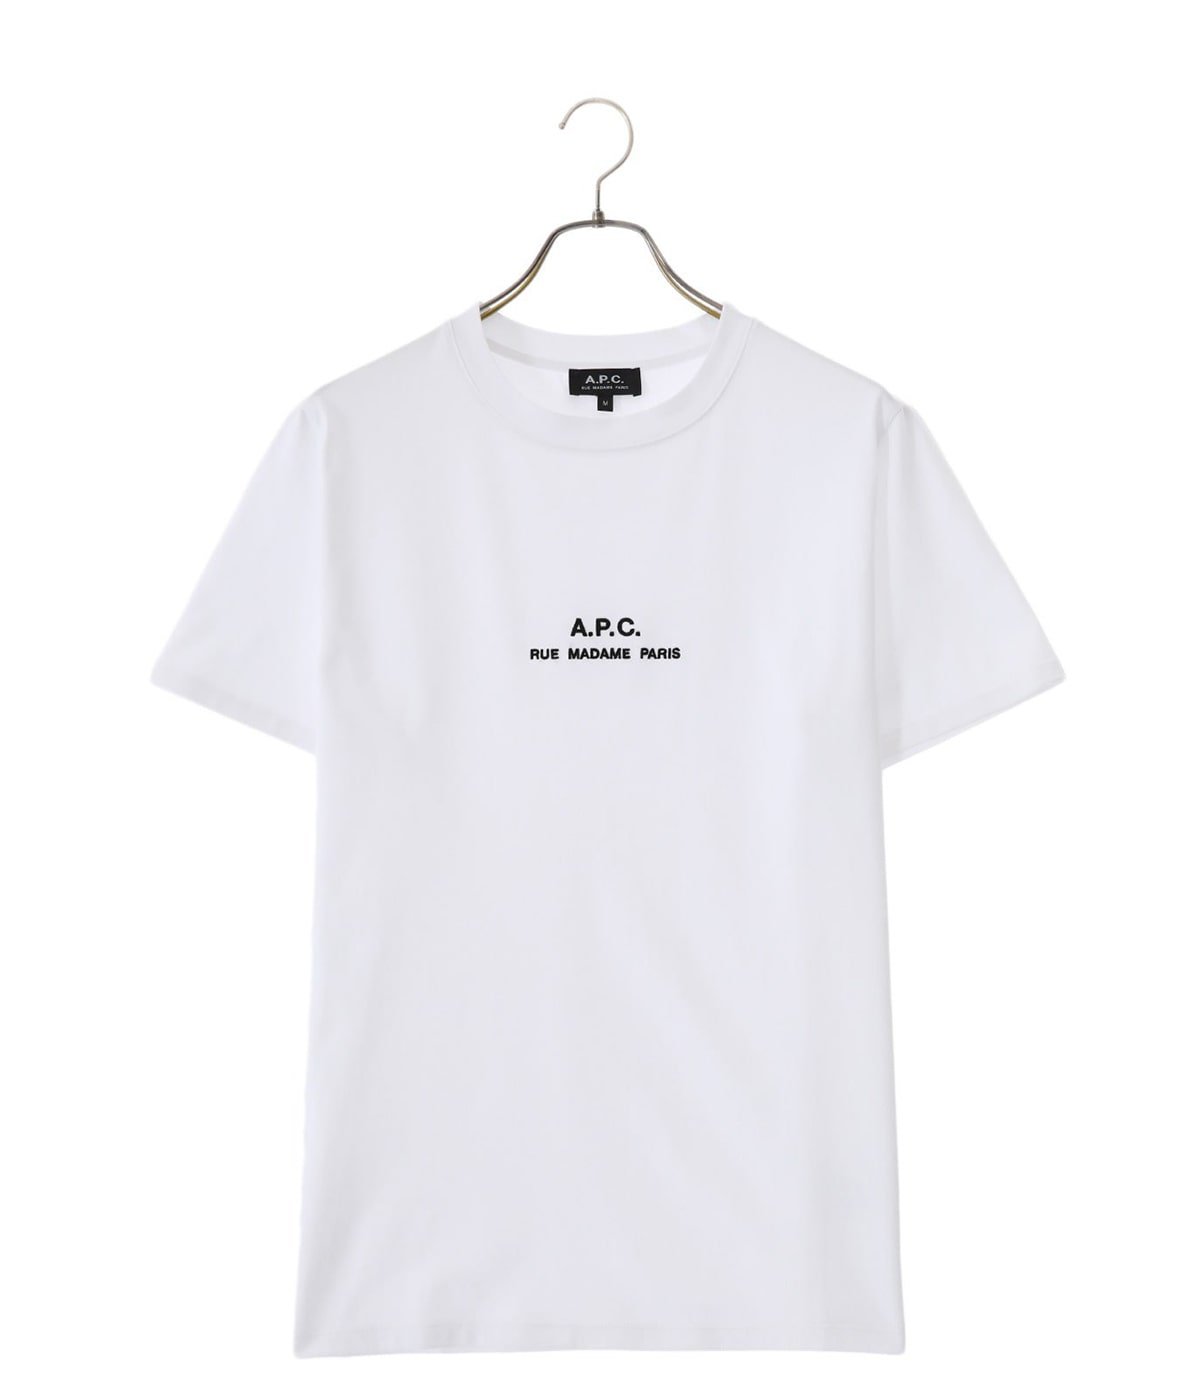 T-SHIRT PETITE RUE MADAME （HOMME) | A.P.C.(アーぺーセー